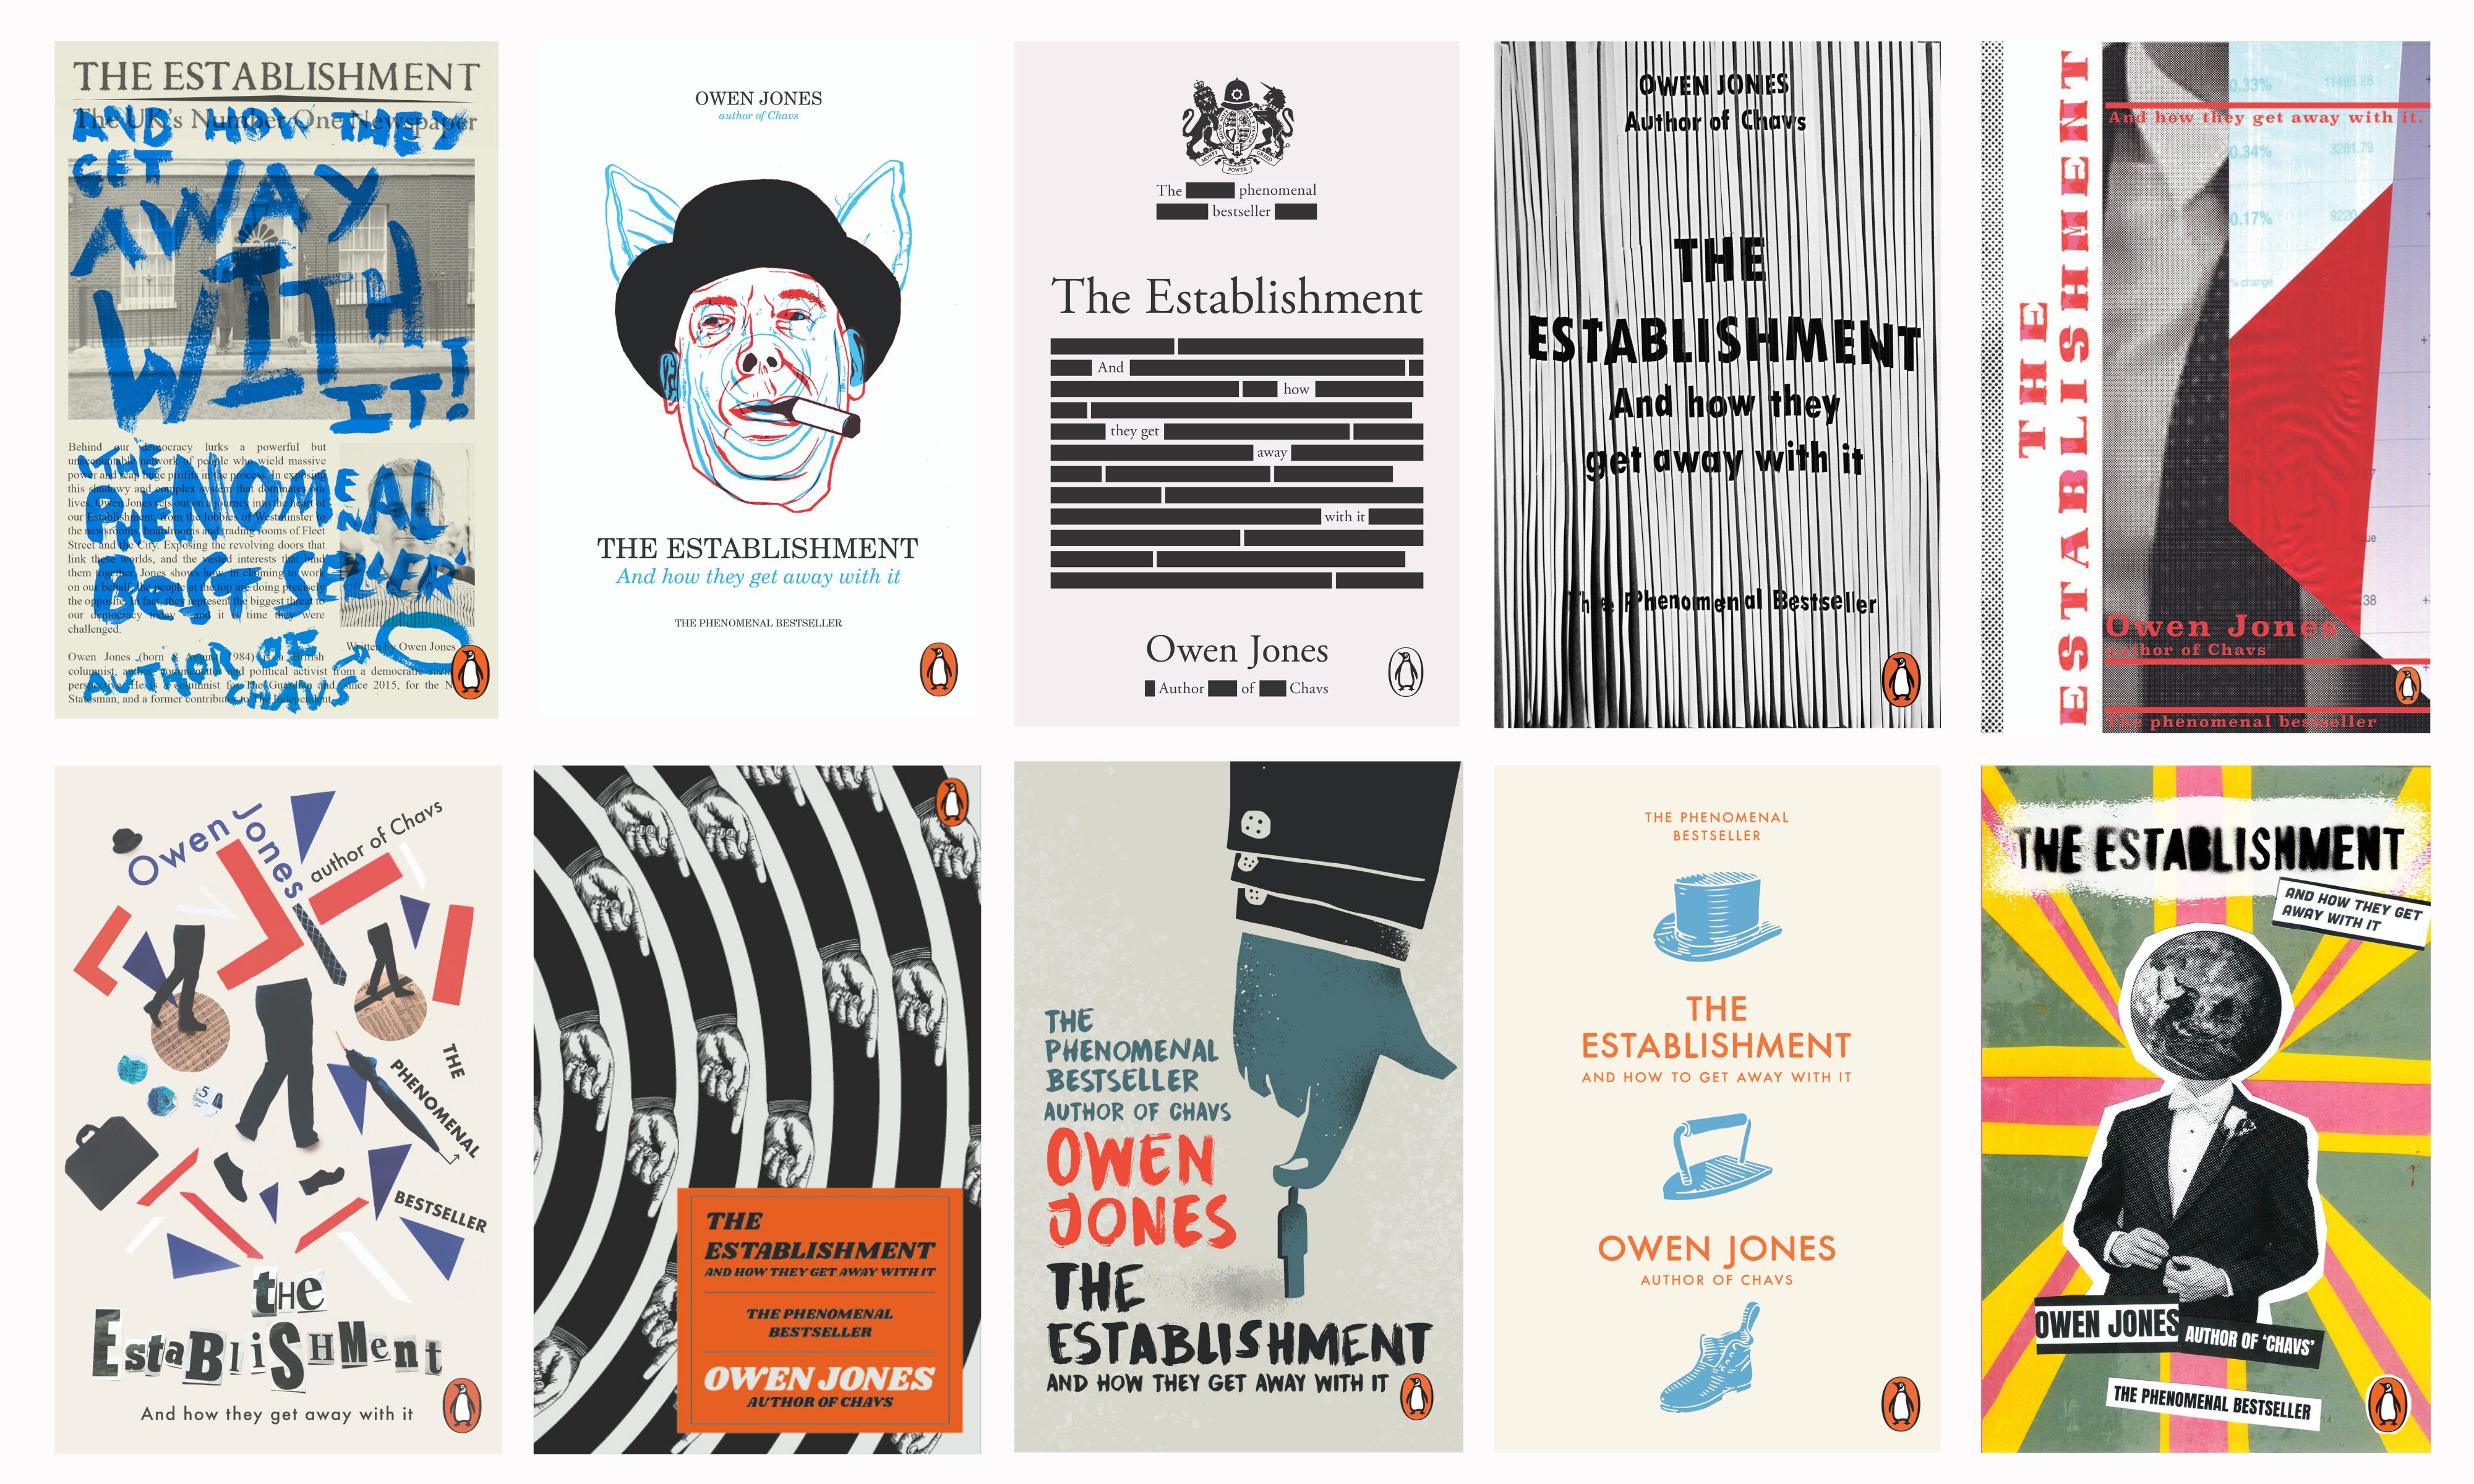 Shortlisted entries for Non-Fiction award